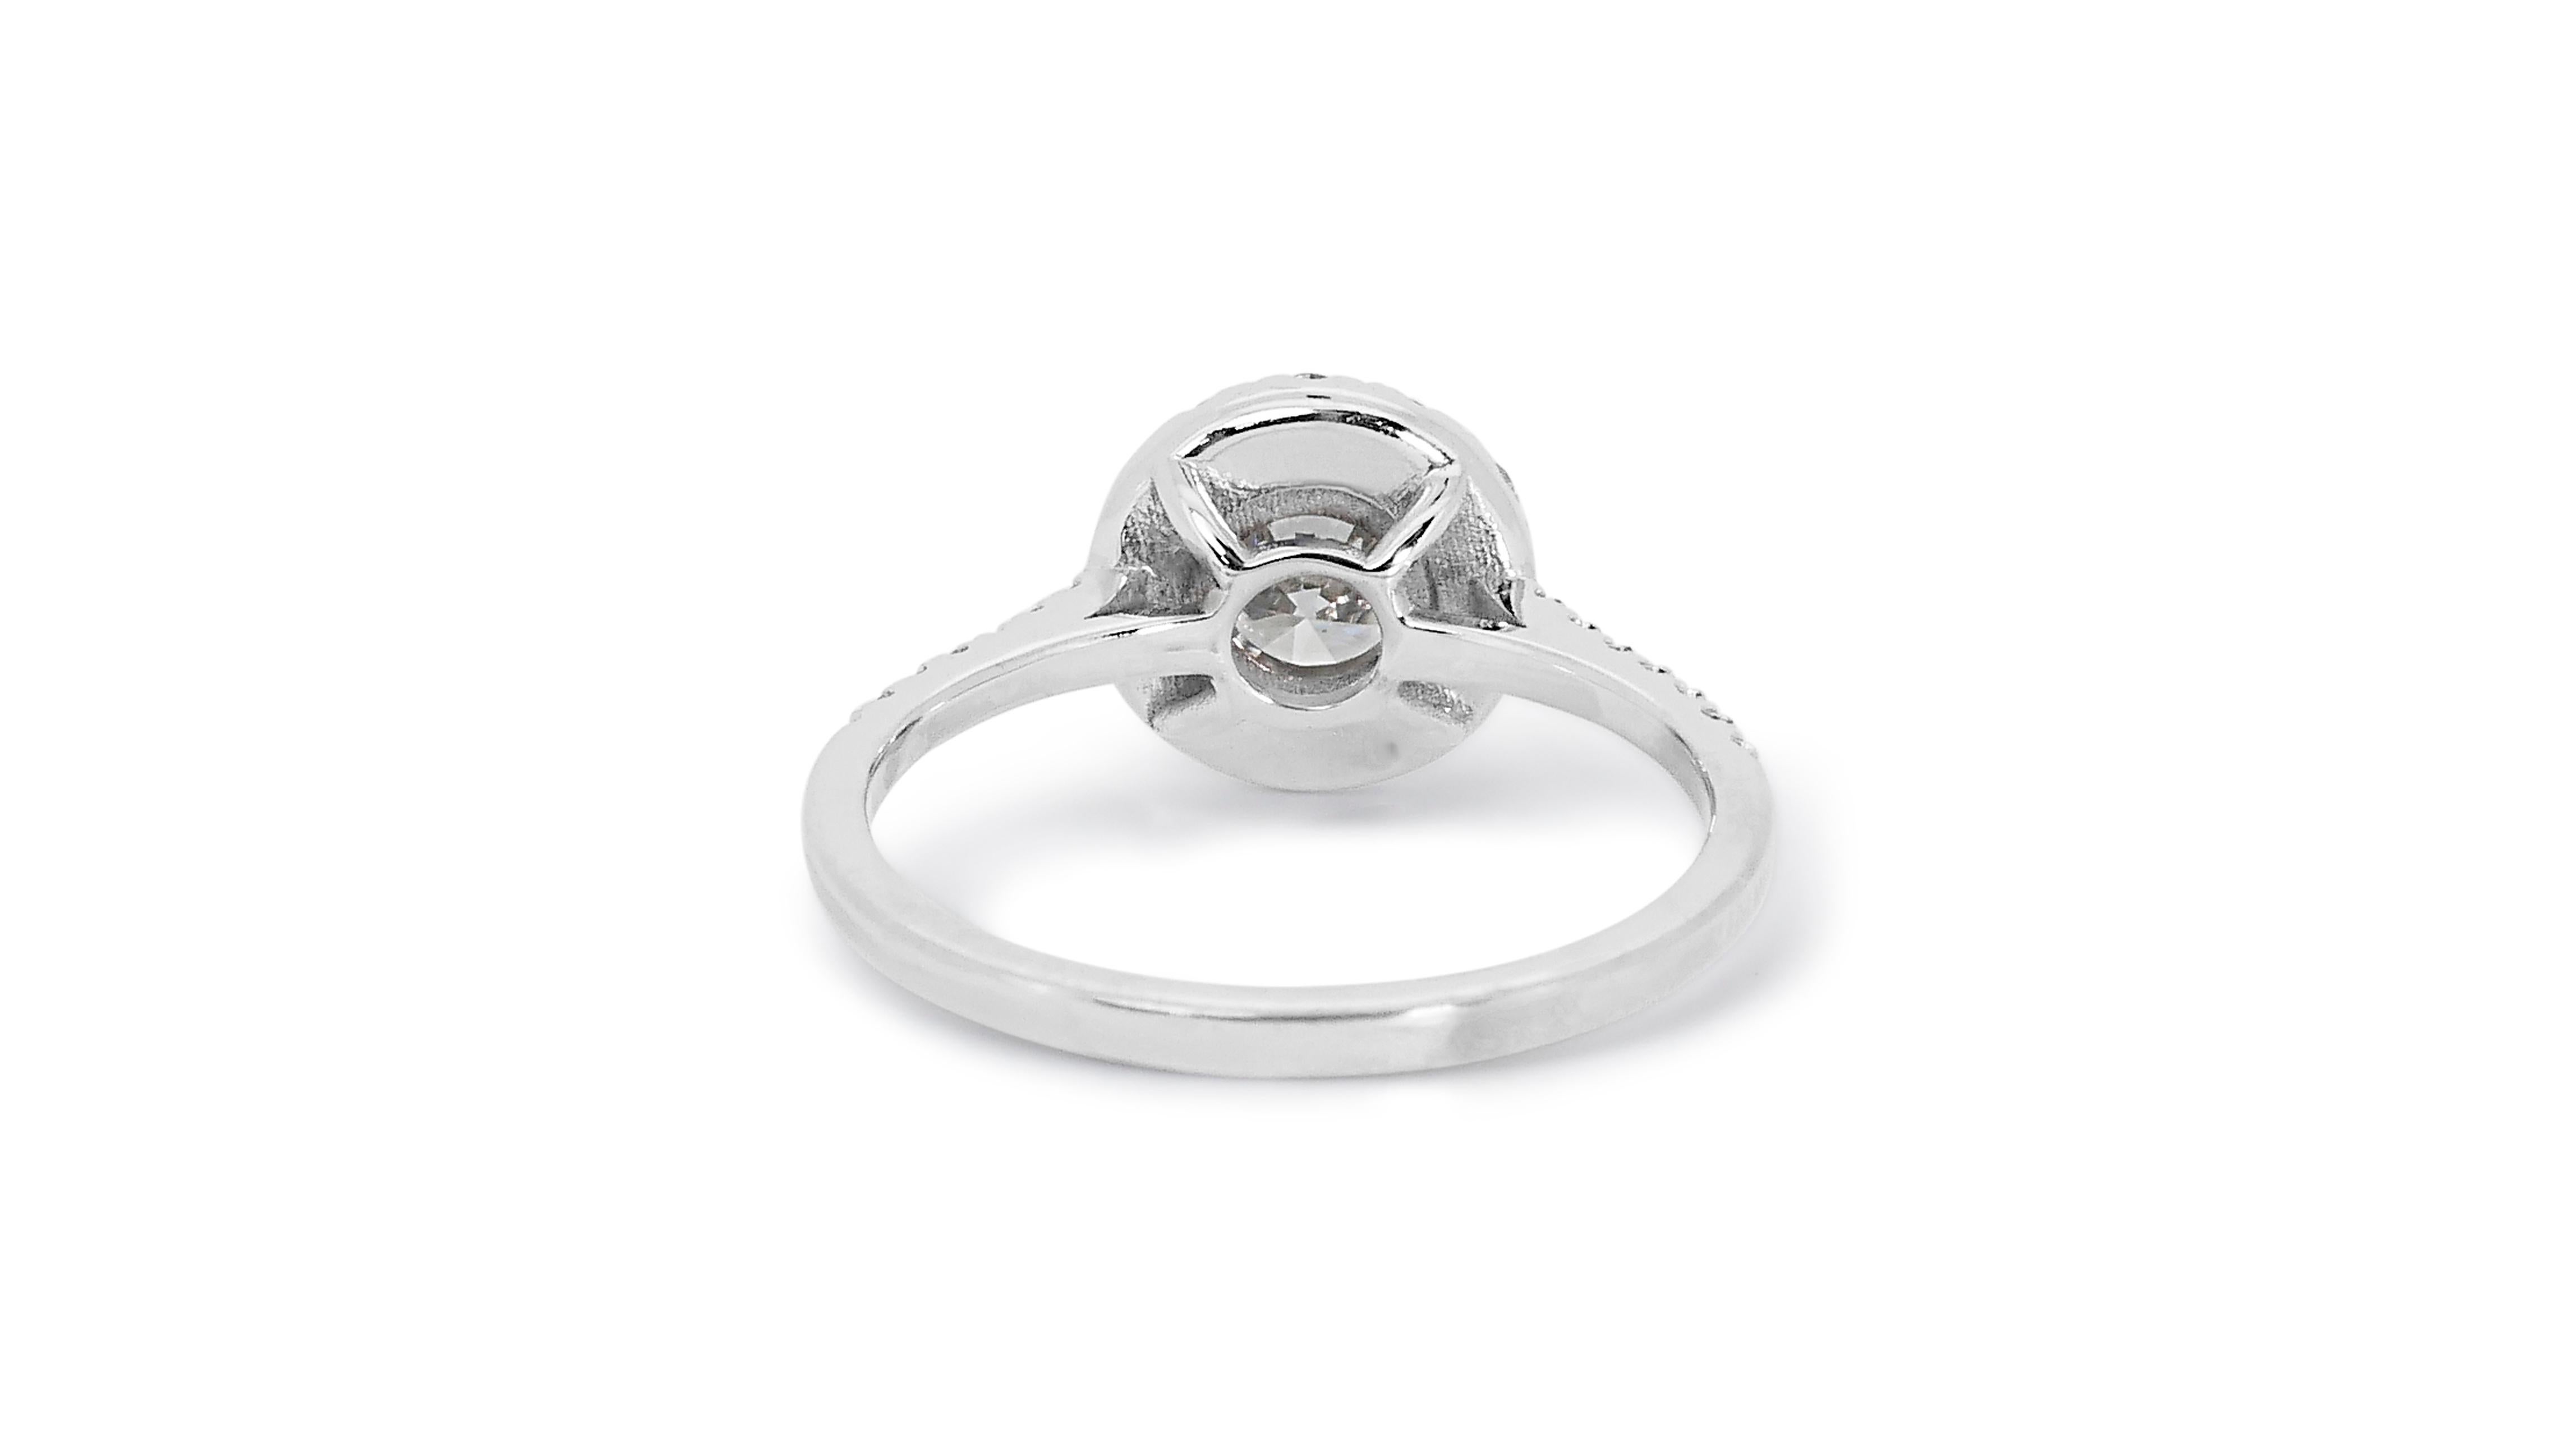 Stunning 1.35ct Diamond Halo Ring in 18k White Gold - GIA Certified For Sale 3